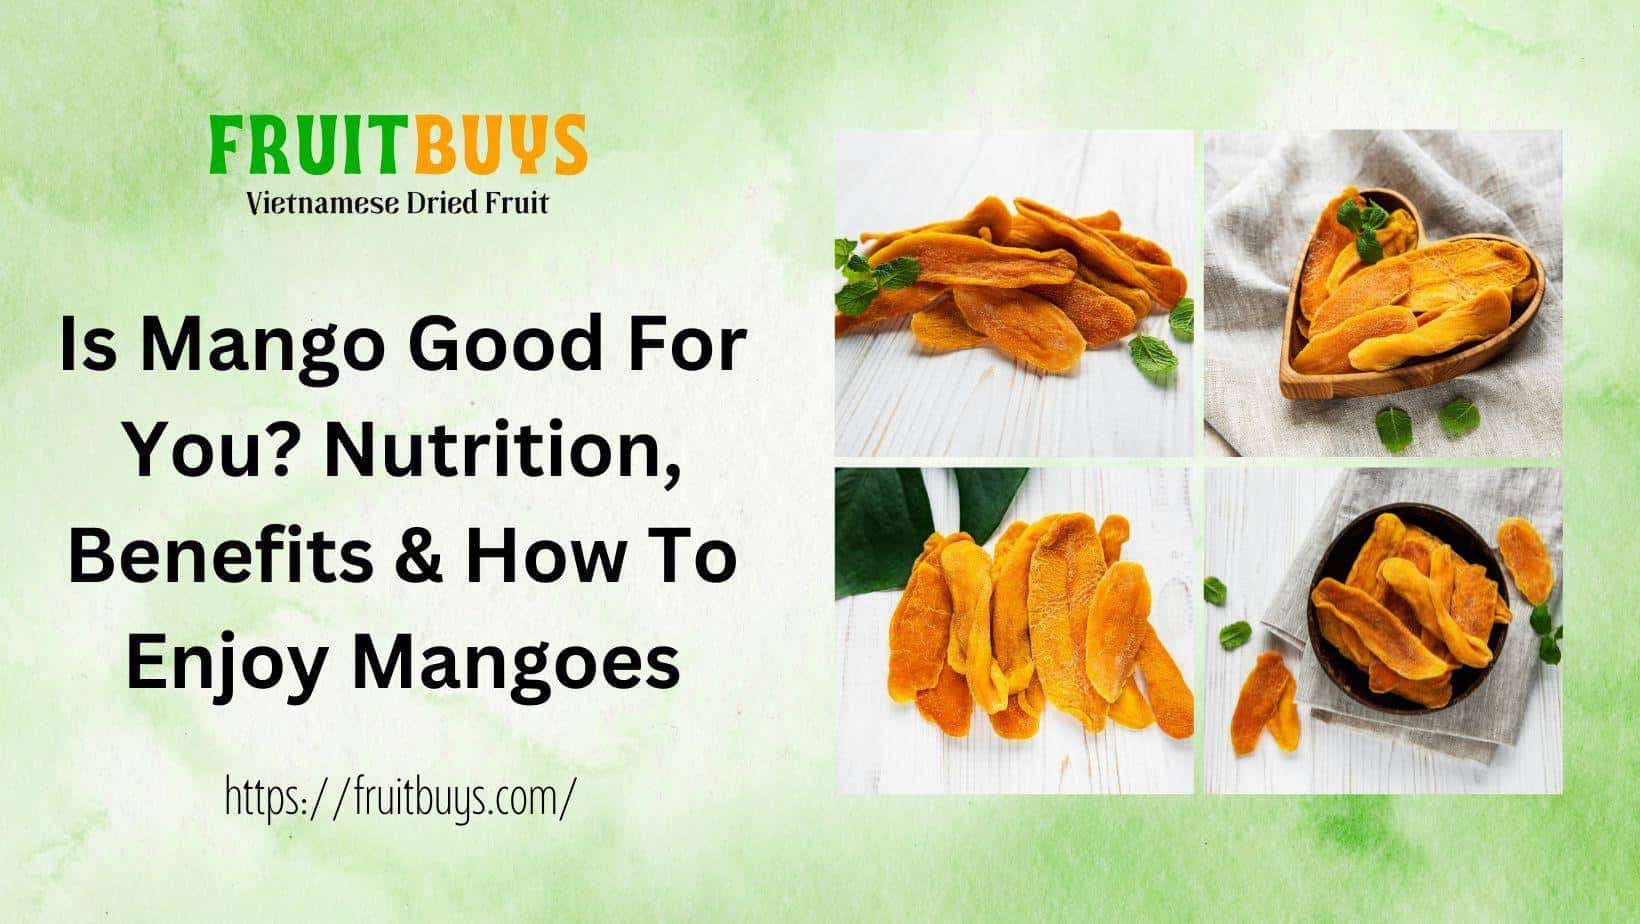 FruitBuys Vietnam  Is Mango Good For You Nutrition, Benefits & How To Enjoy Mangoes